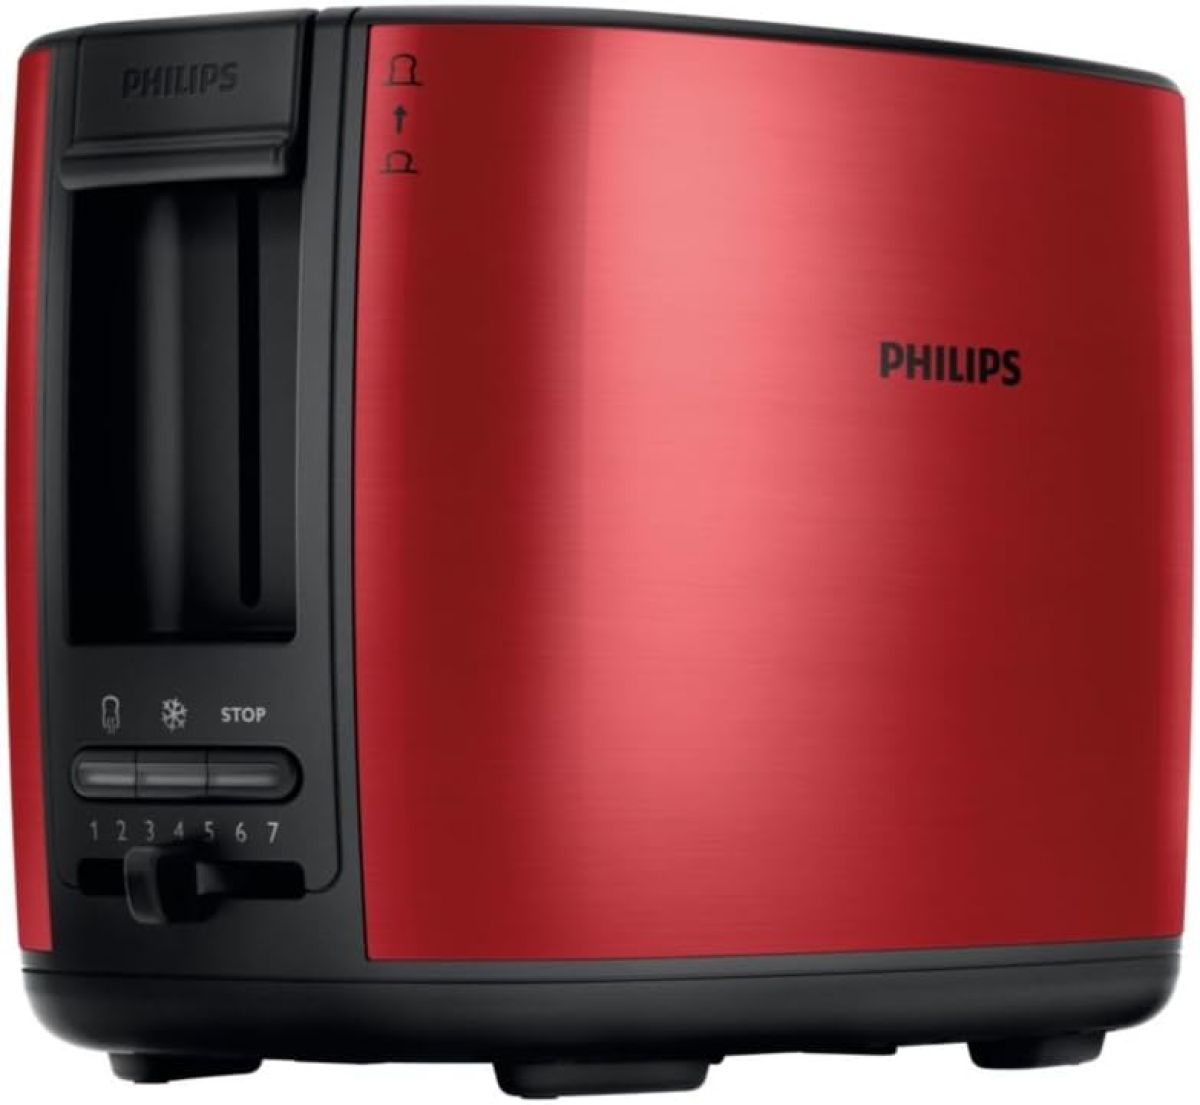 Philips HD2628 Grille-pain occasion seconde main chez